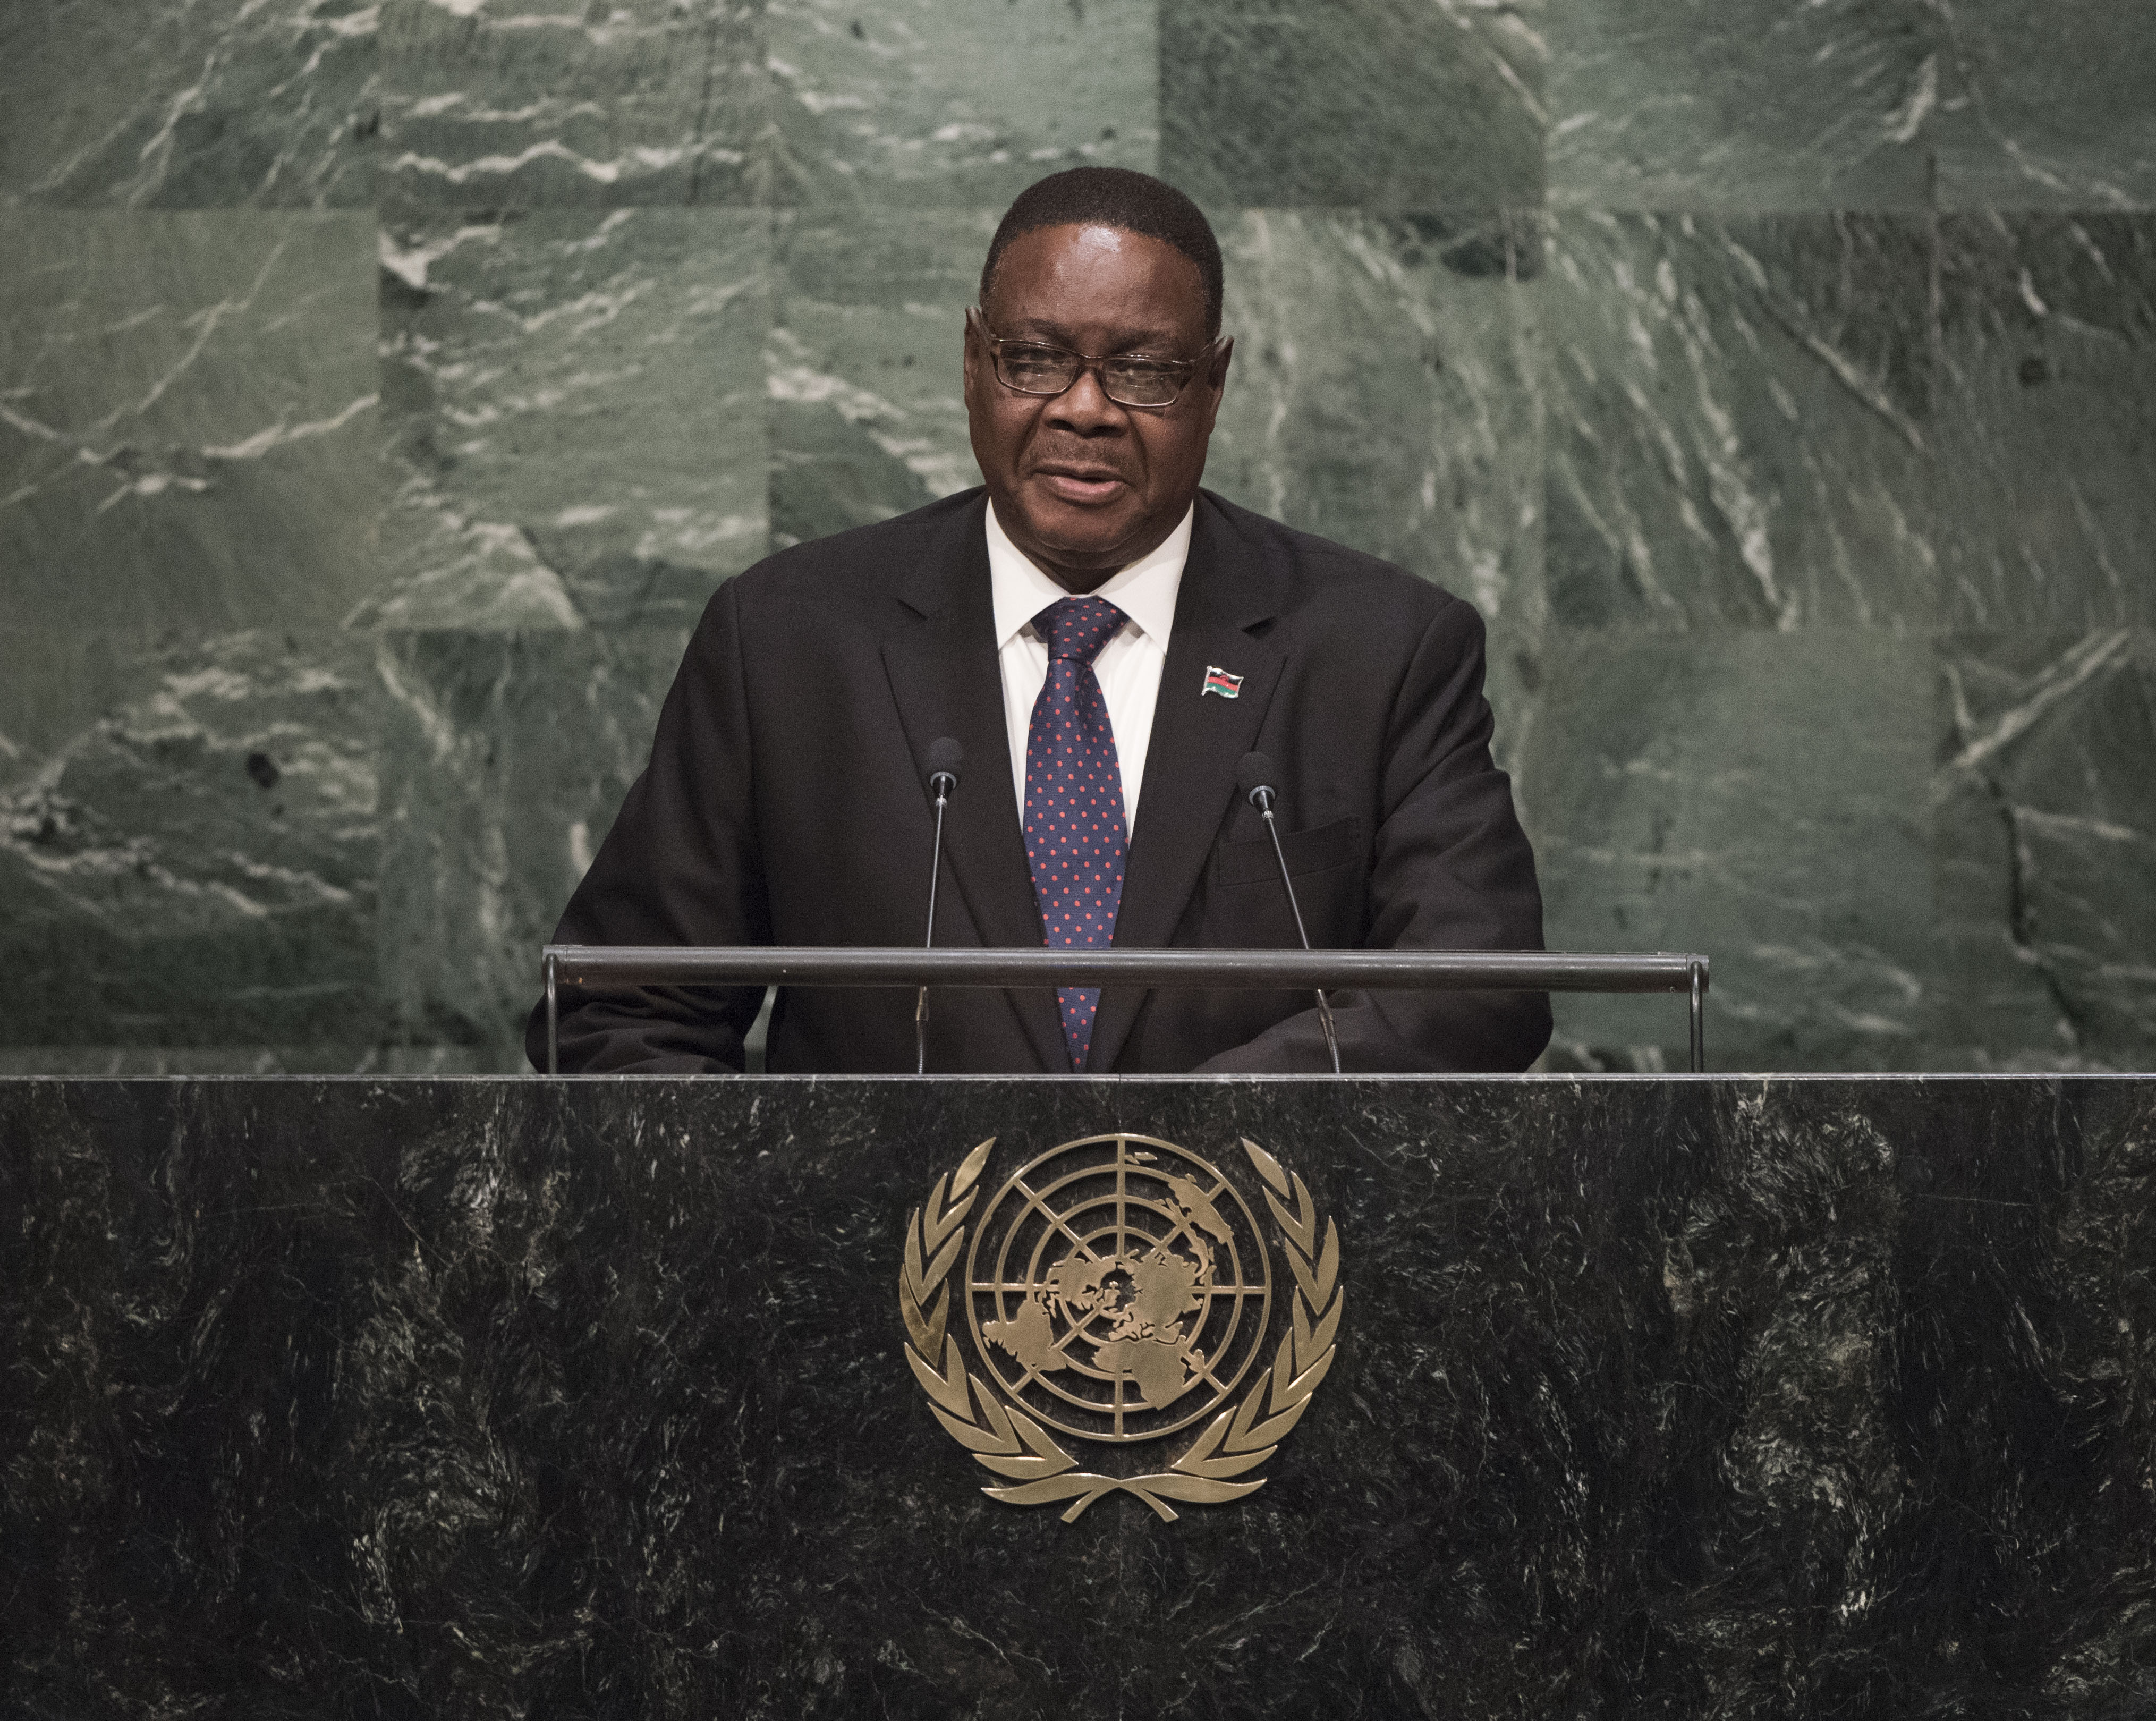 Arthur Peter Mutharika, President of the Republic of Malawi (photo credit: United Nations Photo/flickr)